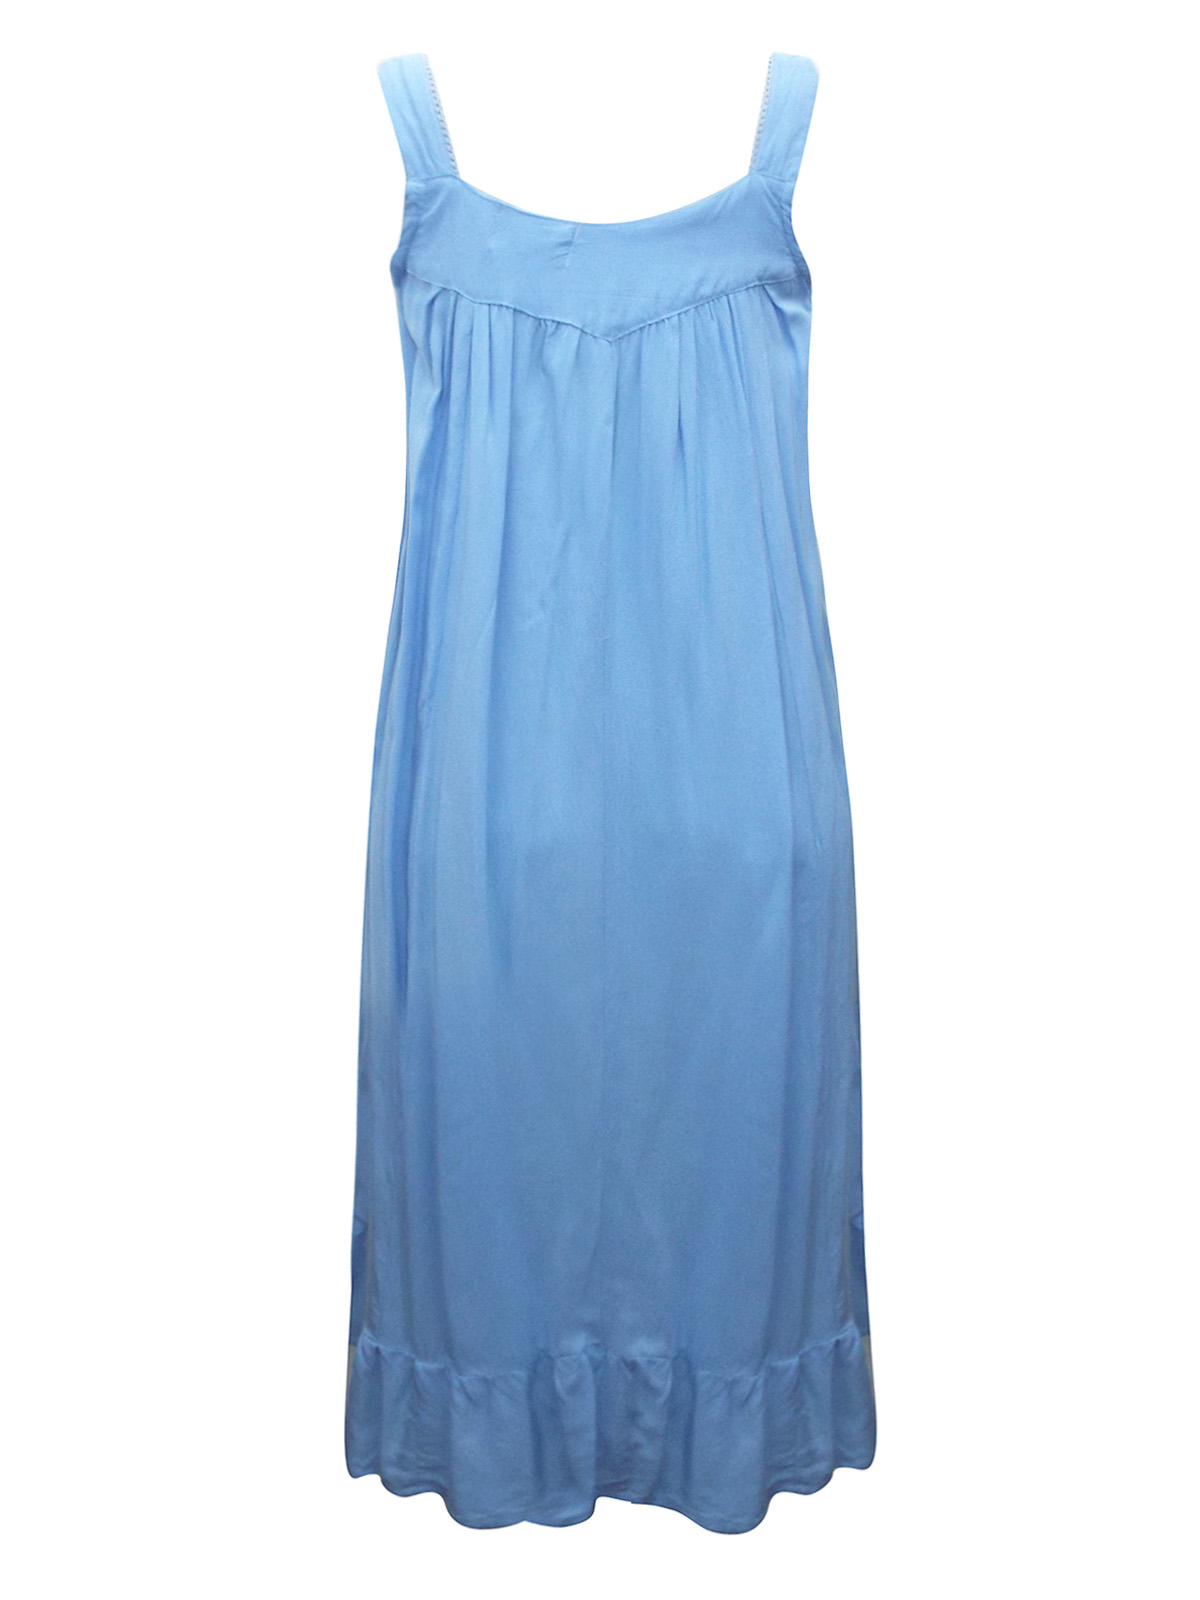 Red Tag - - Red Tag SKY-BLUE Frill Hem Cotton Chemise - Size 10 to 16